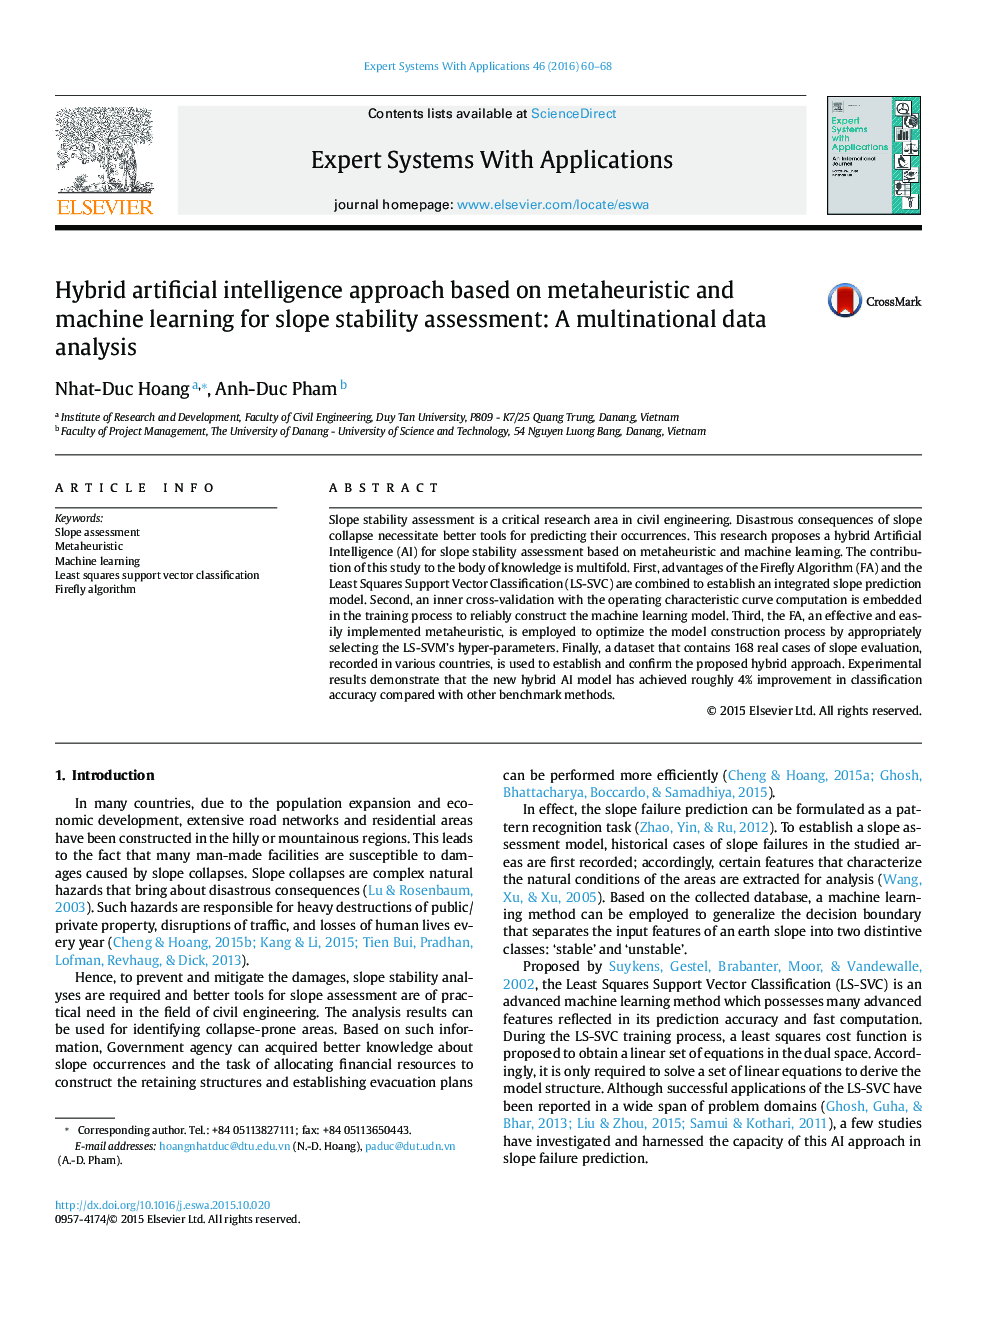 Hybrid artificial intelligence approach based on metaheuristic and machine learning for slope stability assessment: A multinational data analysis
